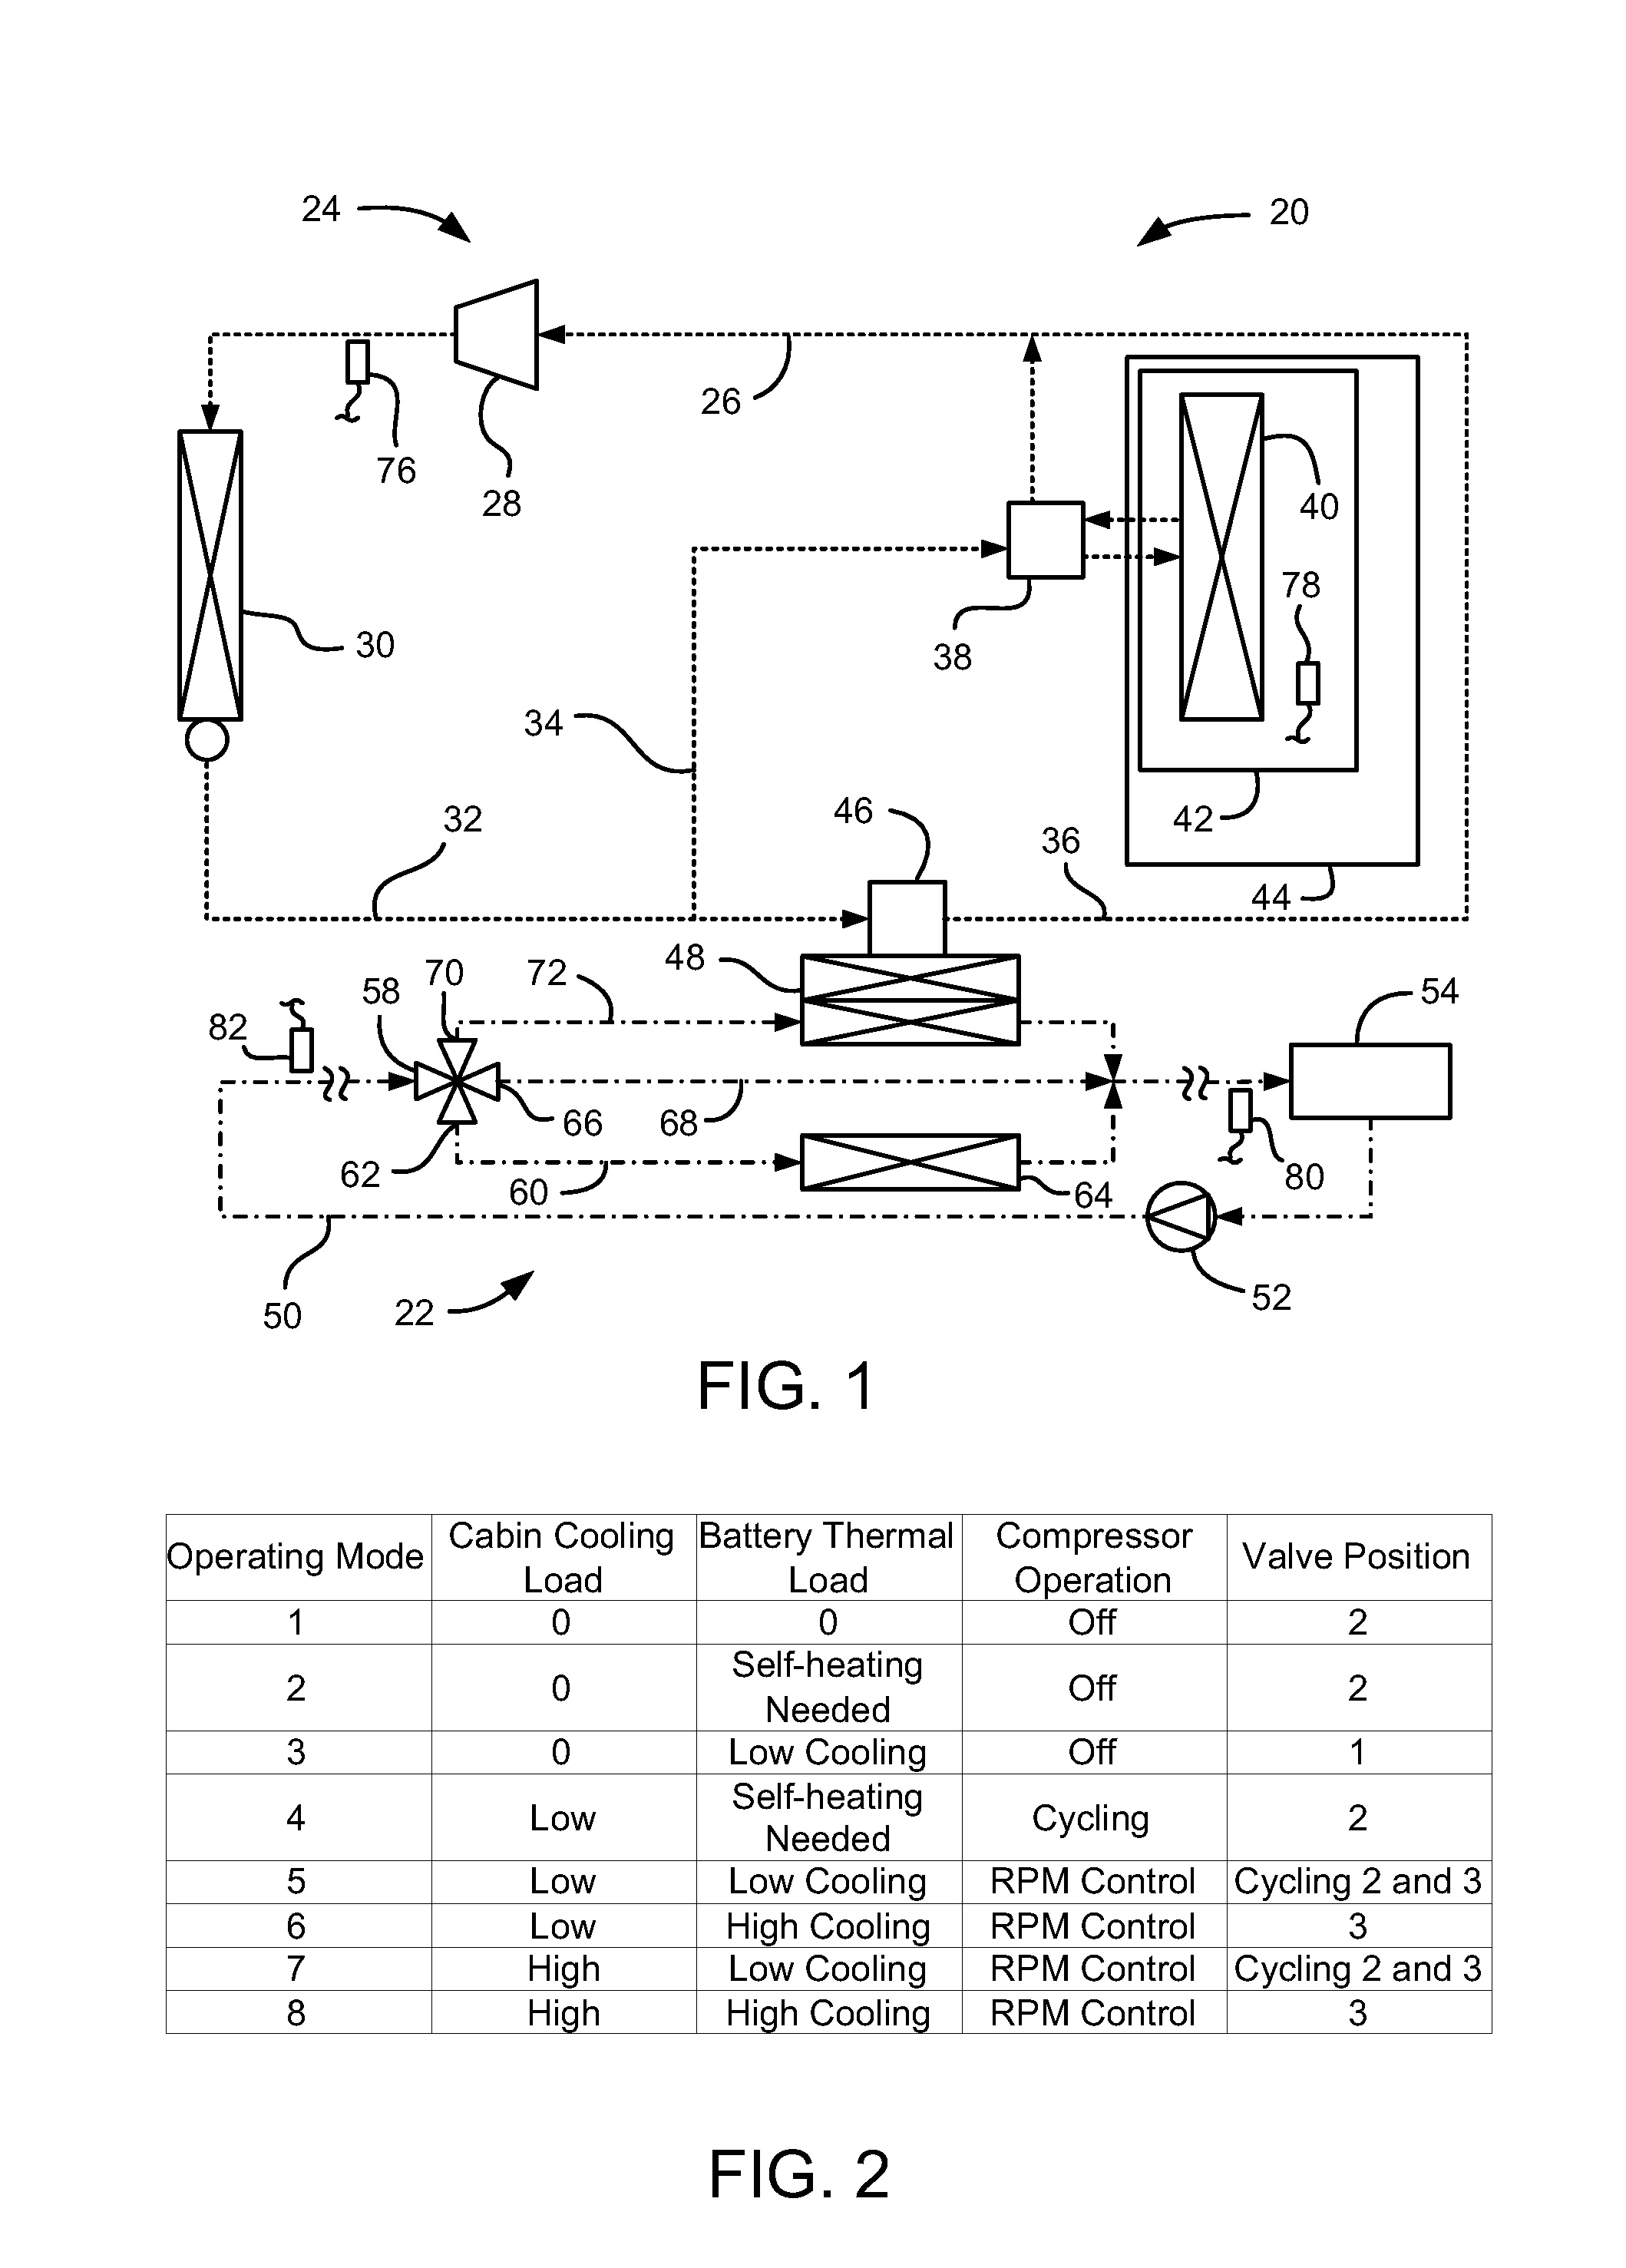 HVAC and Battery Thermal Management for a Vehicle